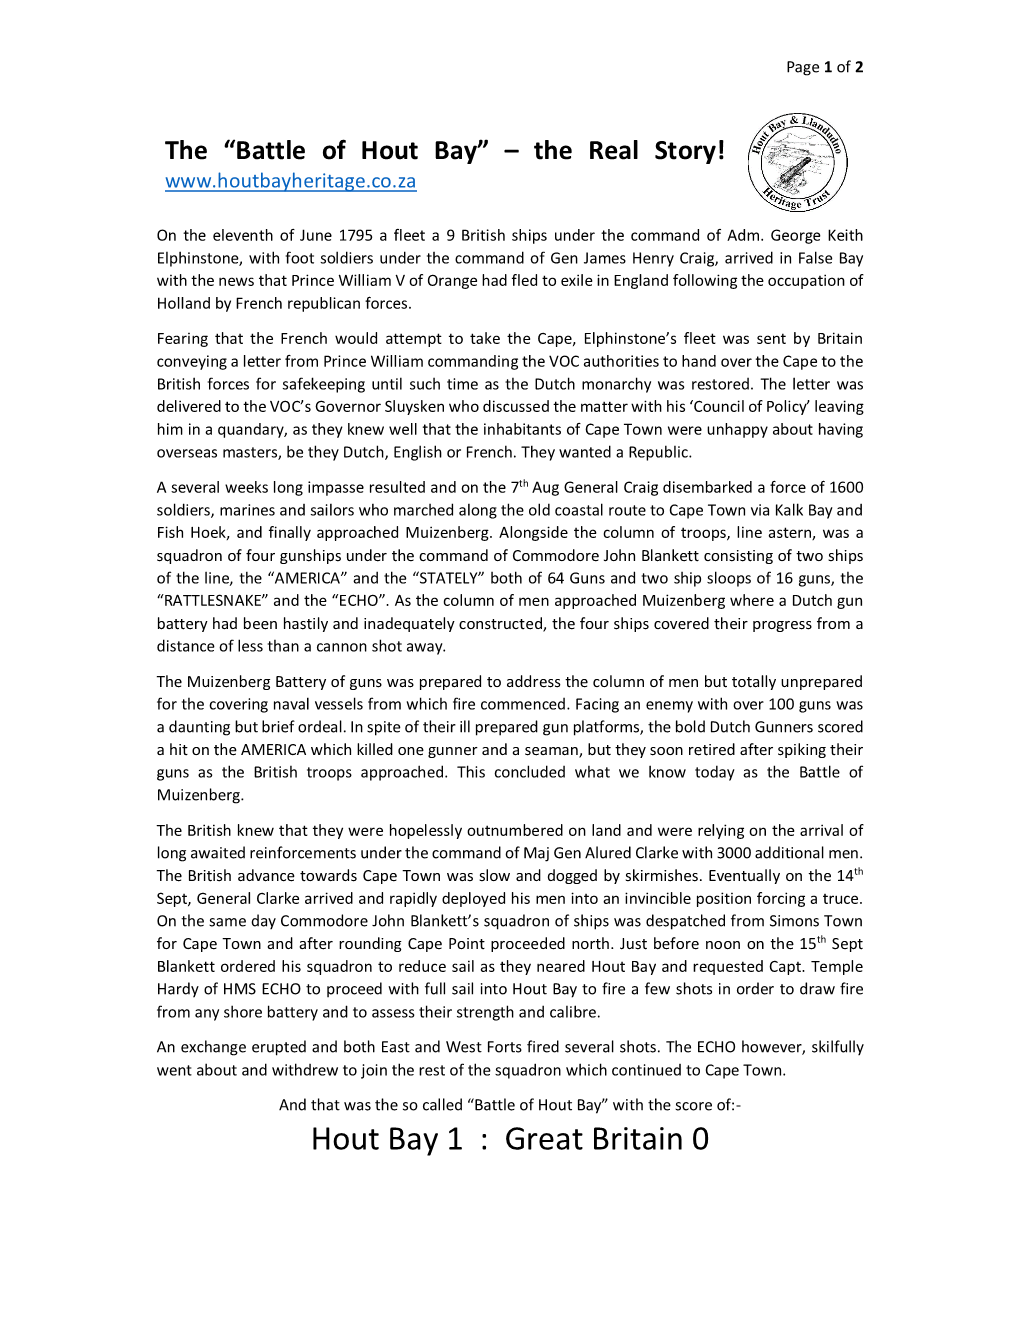 Hout Bay 1 : Great Britain 0 Page 2 of 2